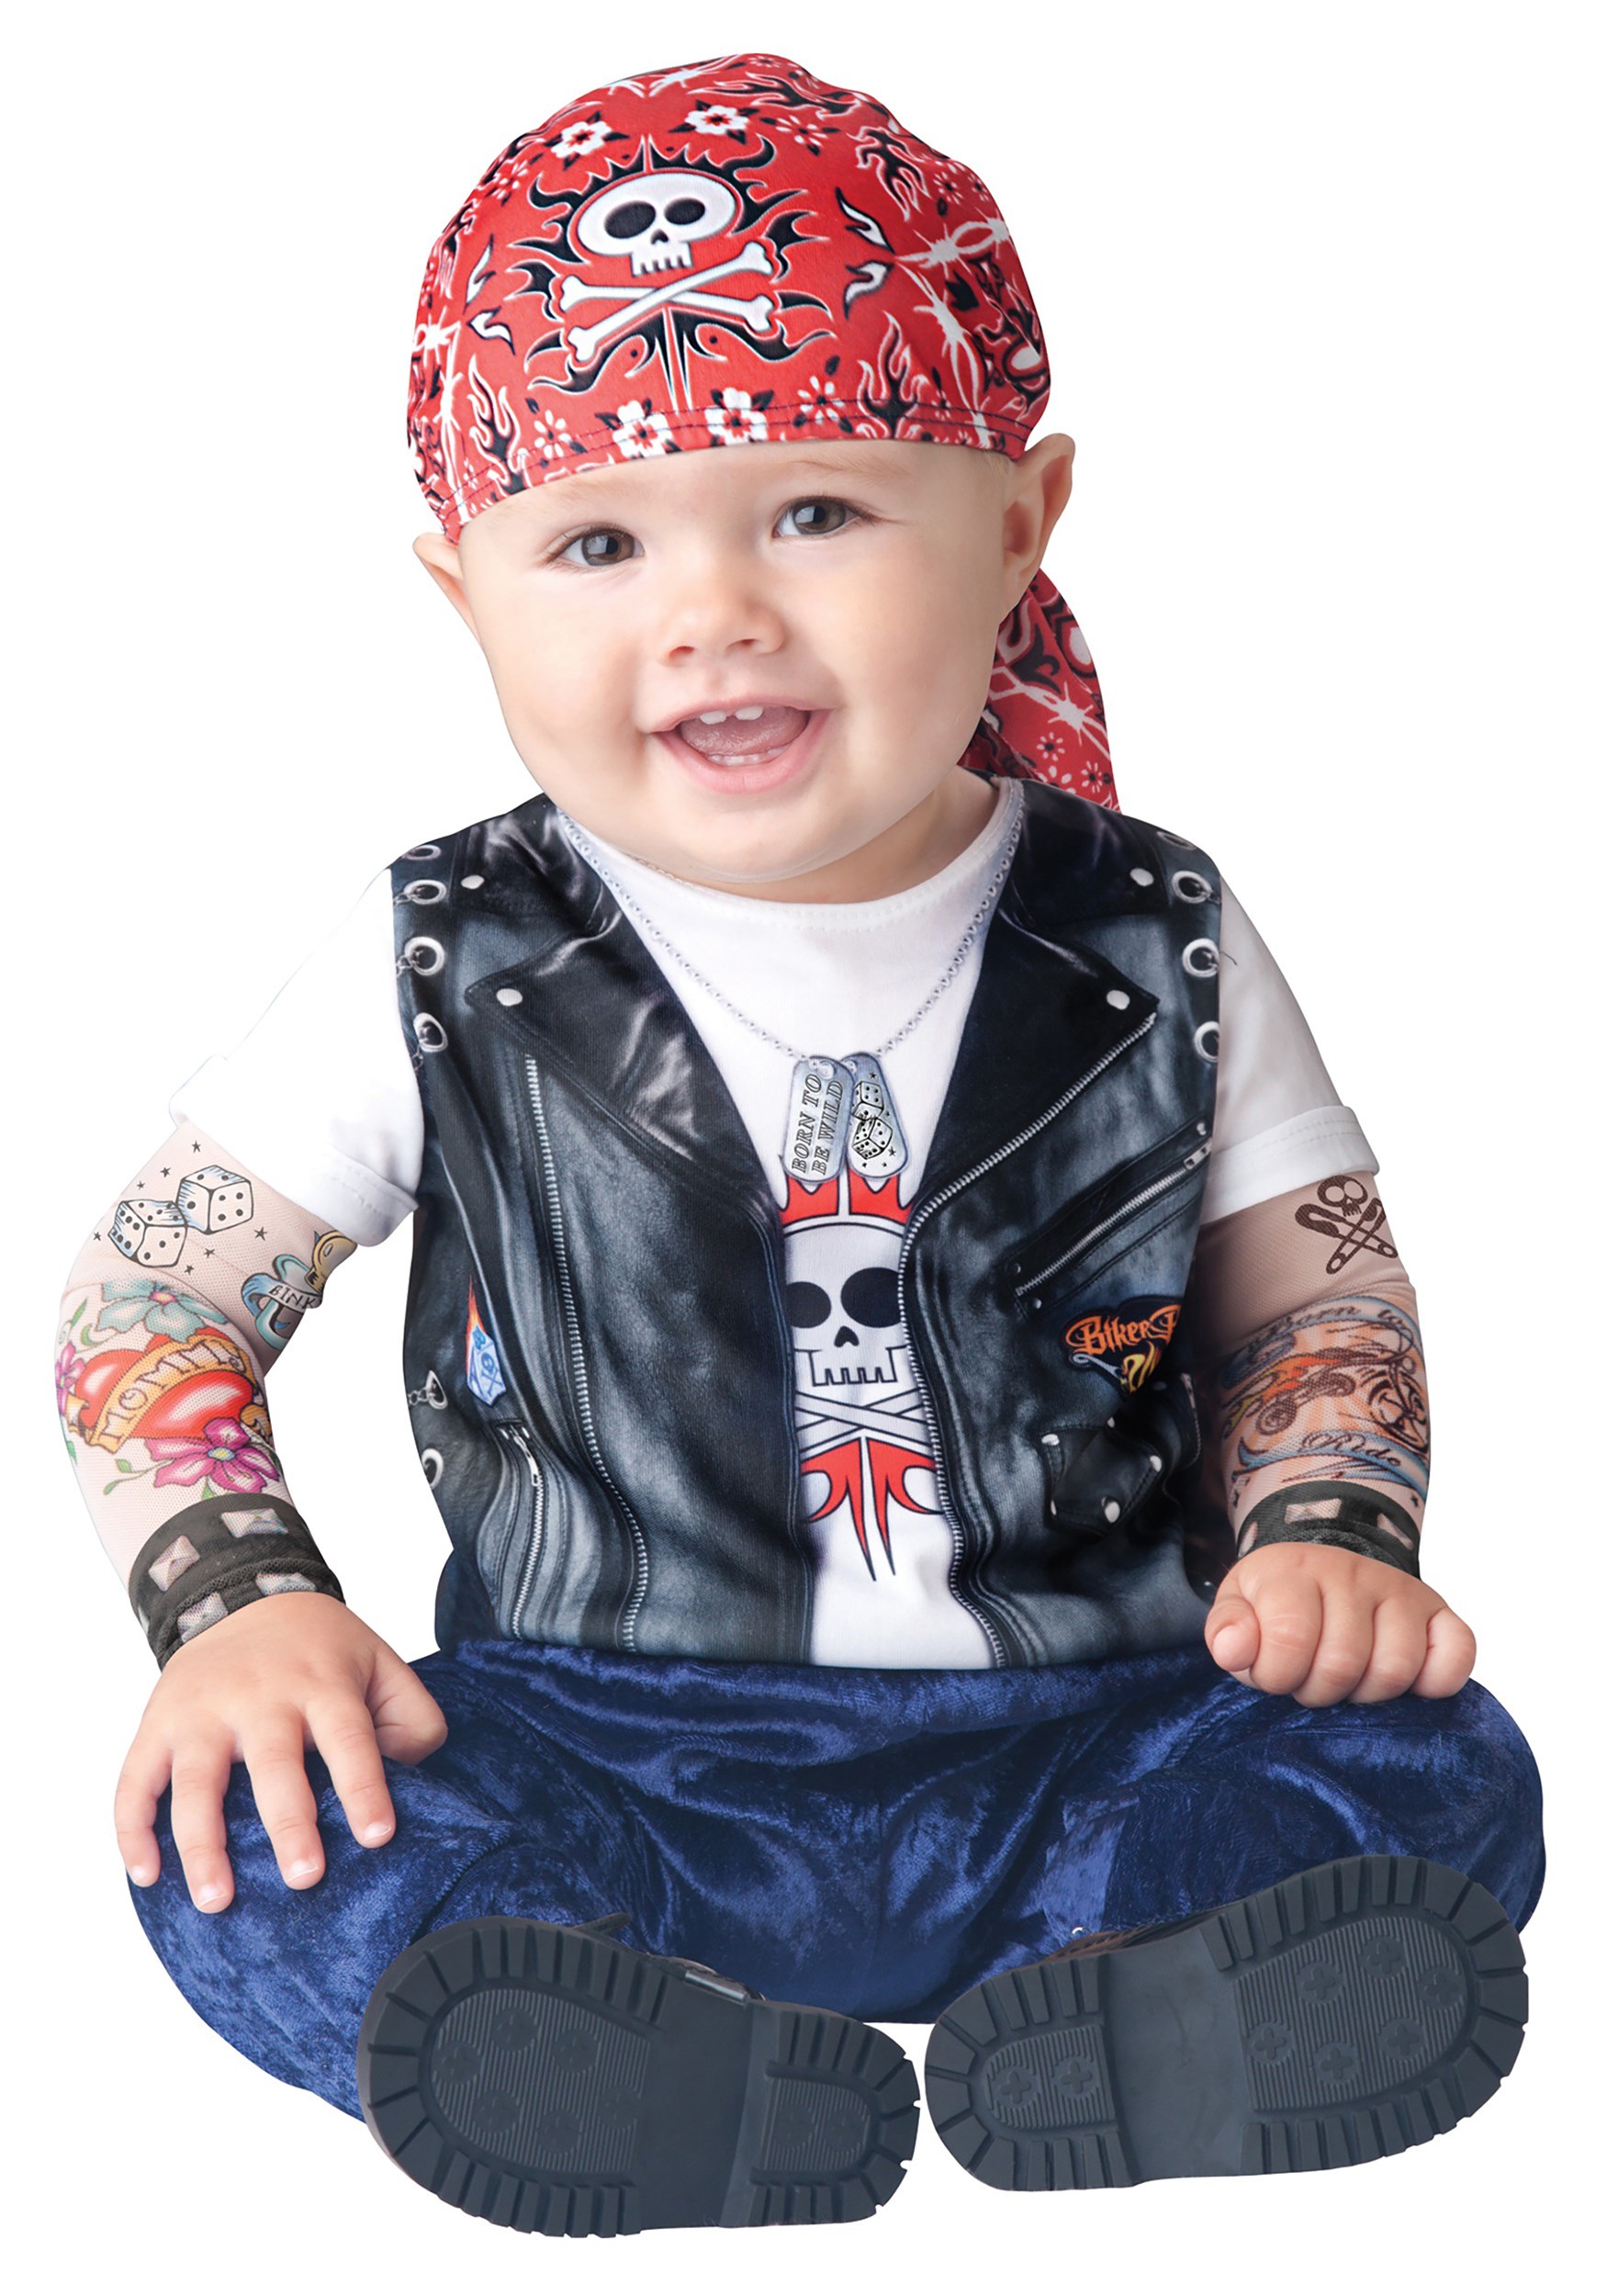 Born to be Wild Biker Costume for Baby